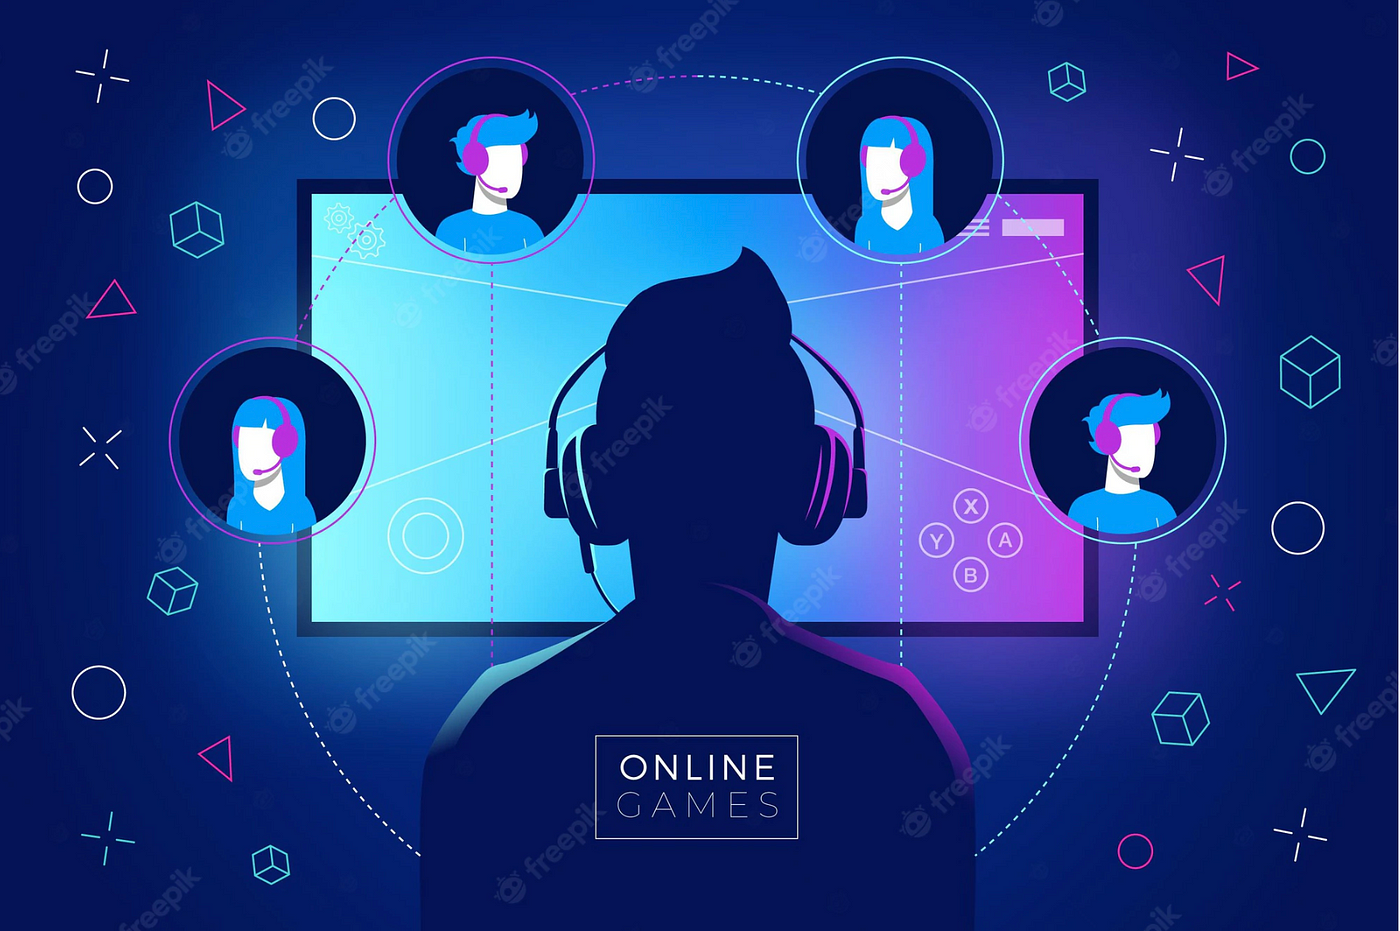 Importance of social aspects of online gaming 2021